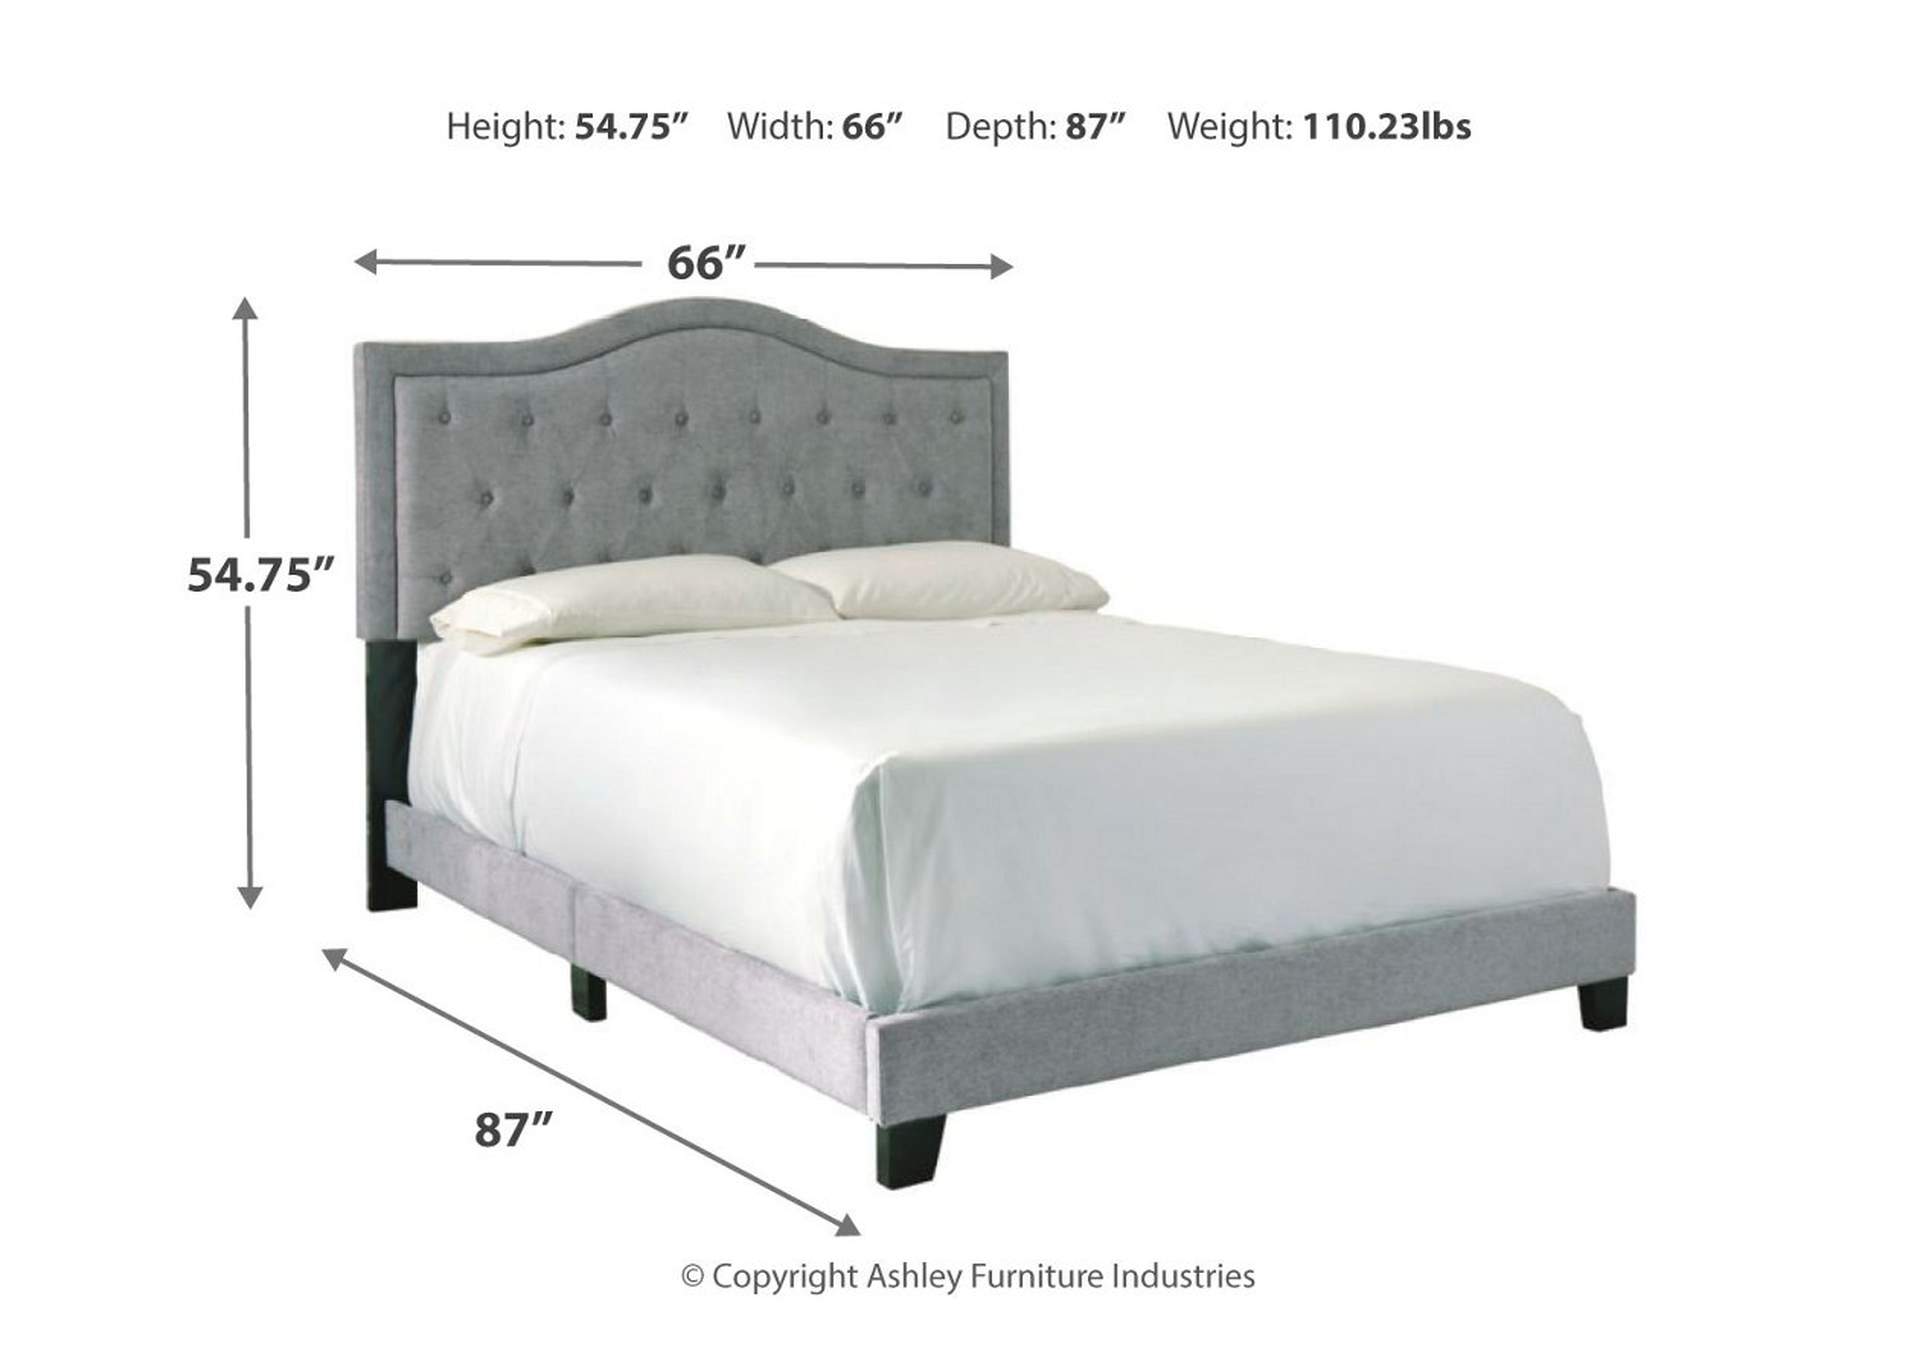 Jerary Queen Upholstered Bed,Signature Design By Ashley